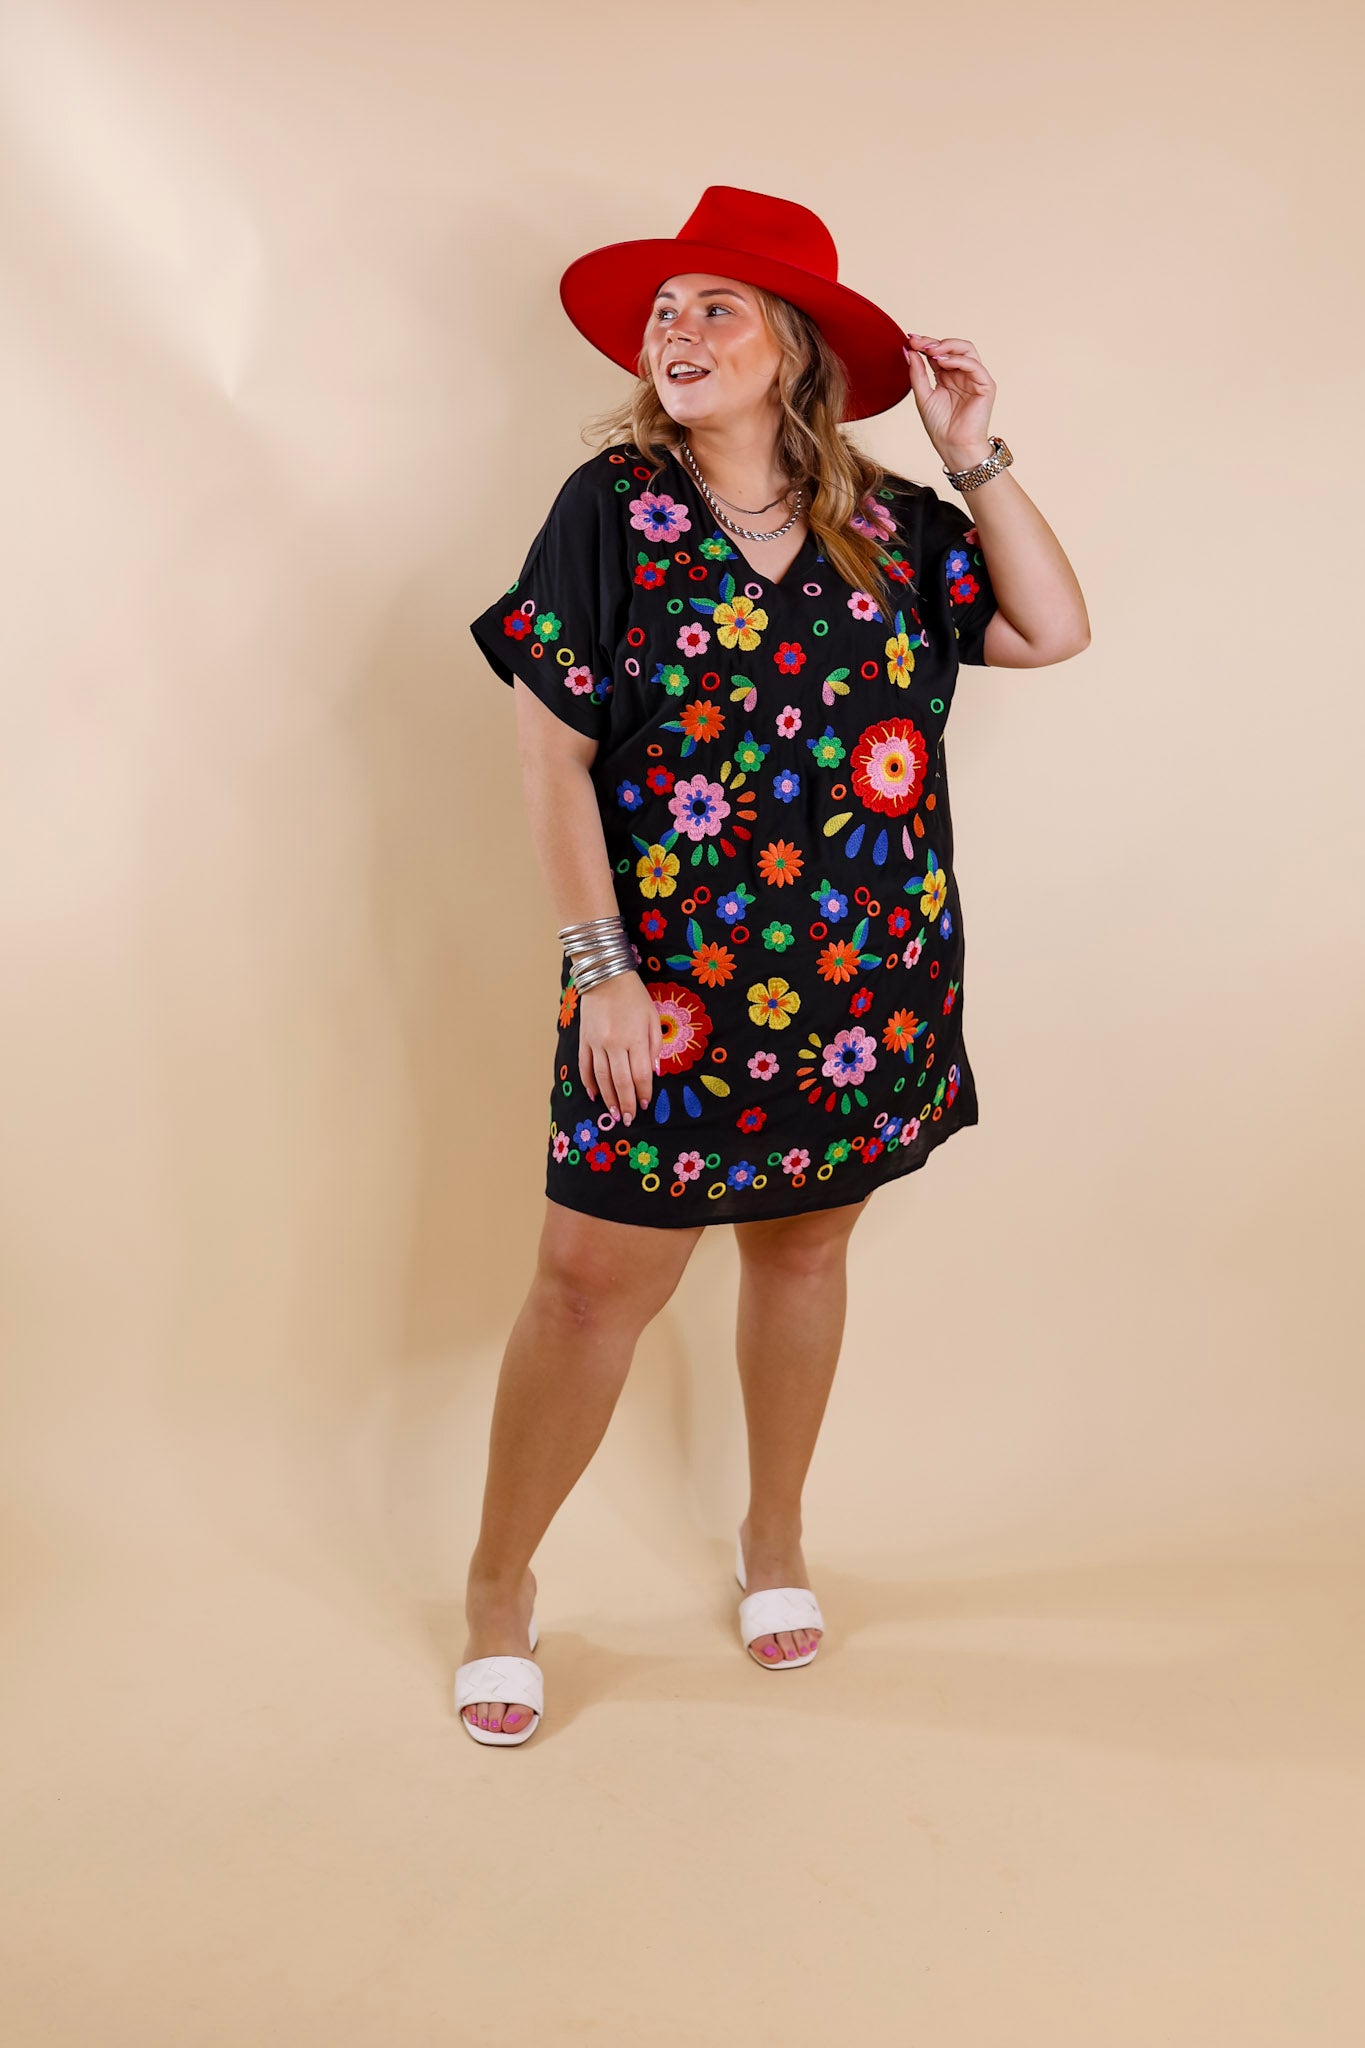 New In Town Floral Embroidered Short Sleeve Dress in Black - Giddy Up Glamour Boutique